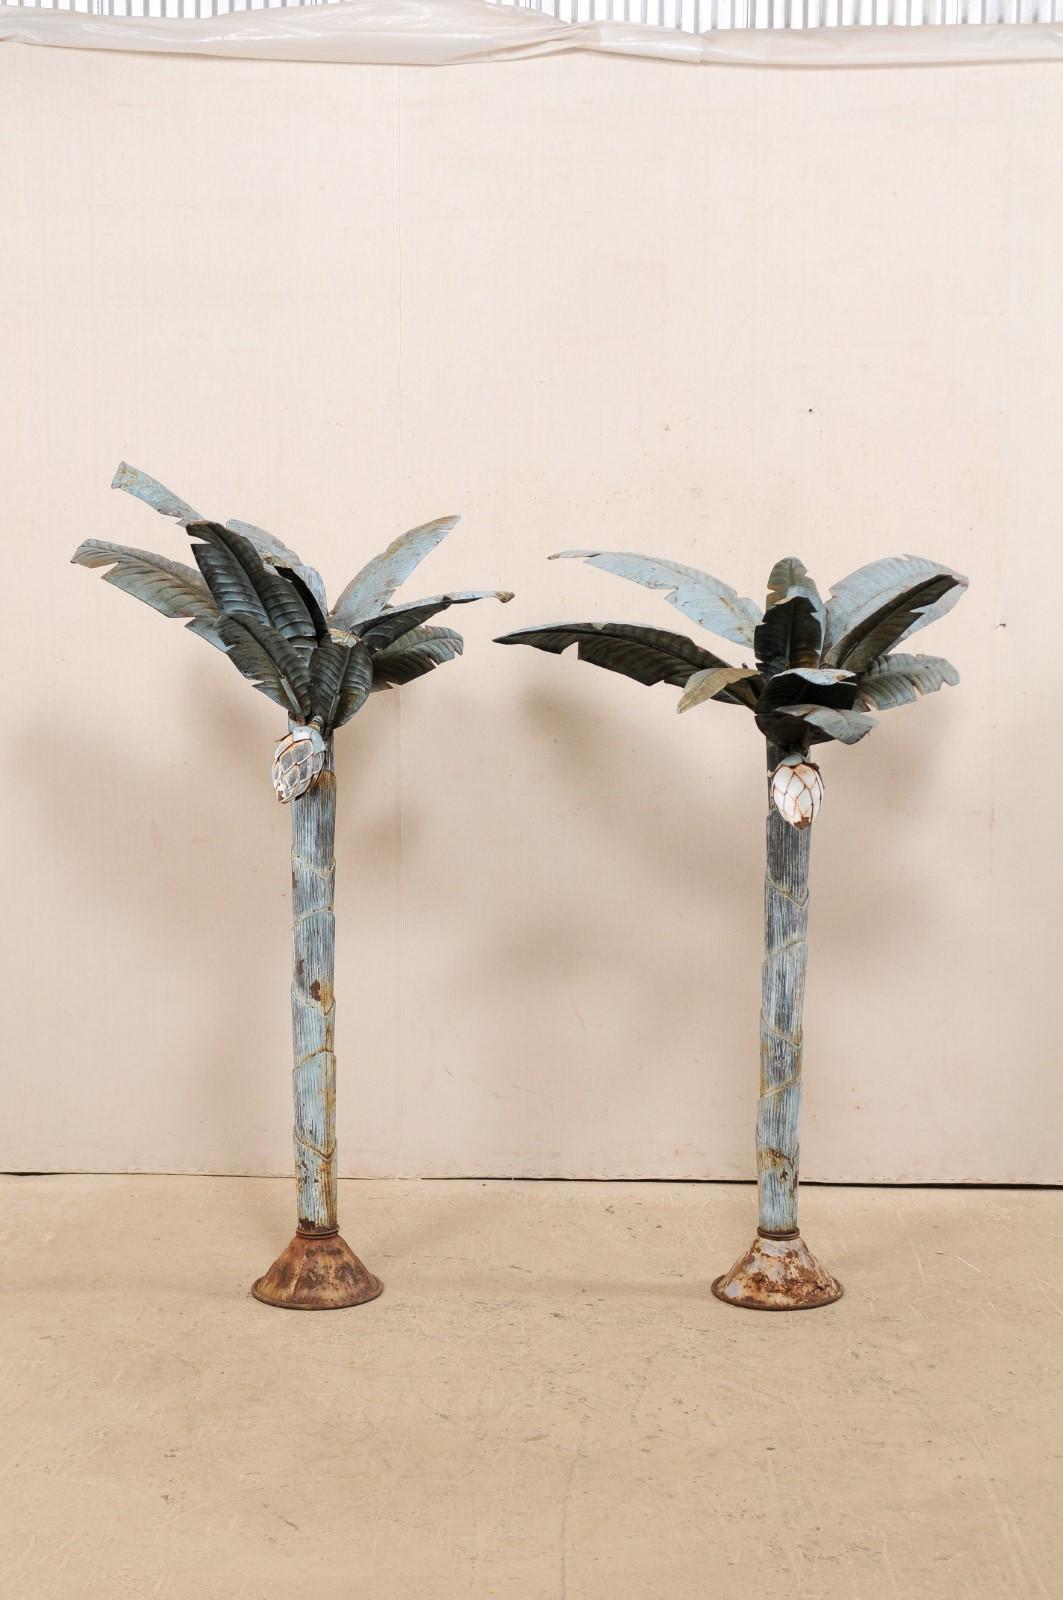 A pair of modern-designed and painted metal palm trees from the mid-20th century. This pair of vintage American whimsical metal sculptures, each standing approximately 5.5 feet in height, are replicas of a pair of palm trees, each having a single